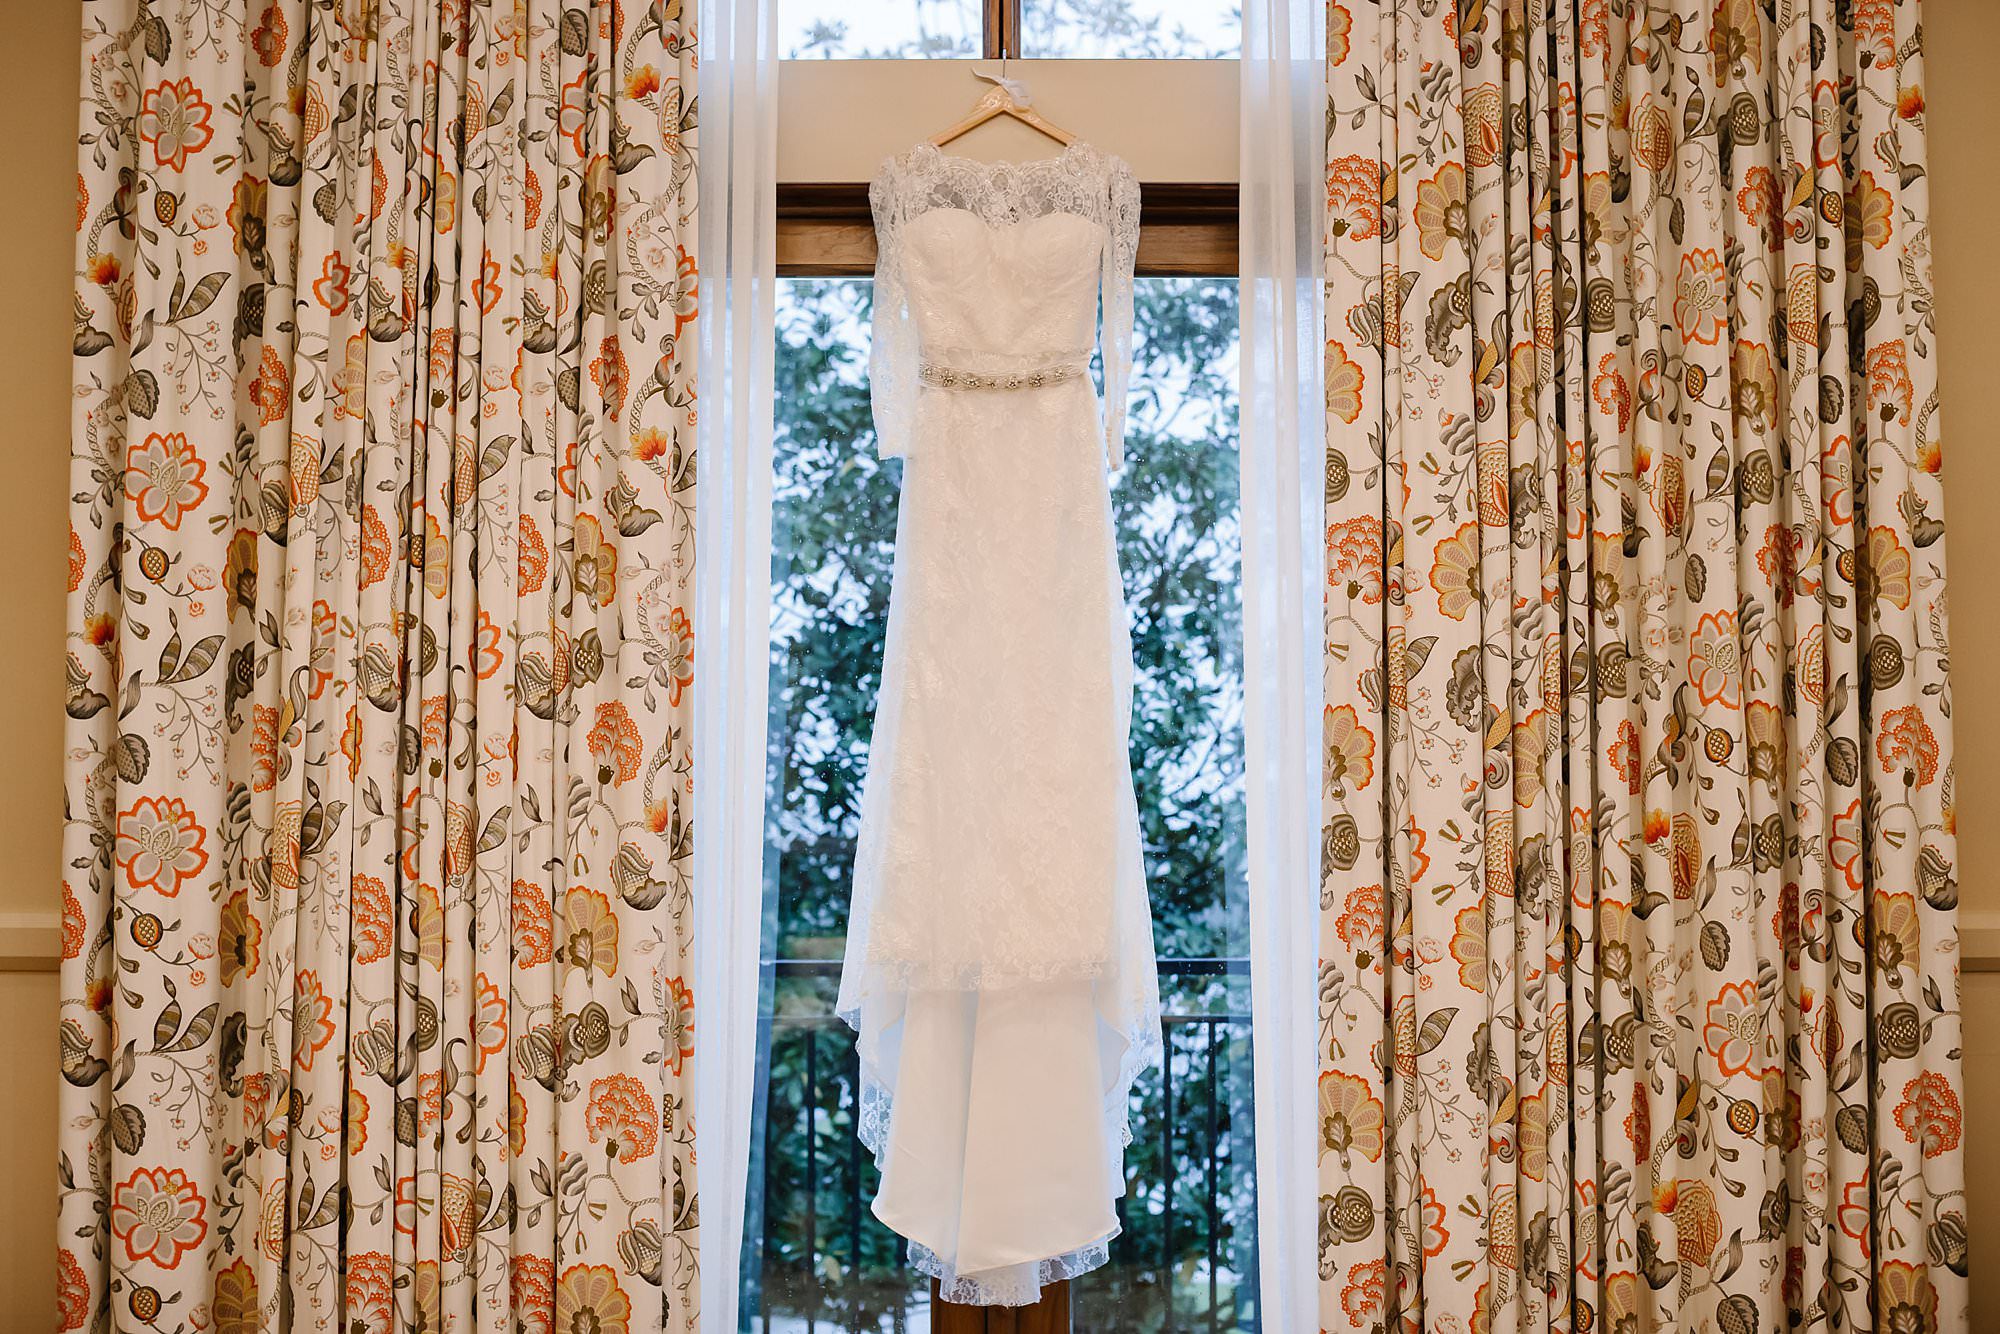 Lace sleeved wedding dress hanging in the bridal suite at Henderson Beach Resort and Spa